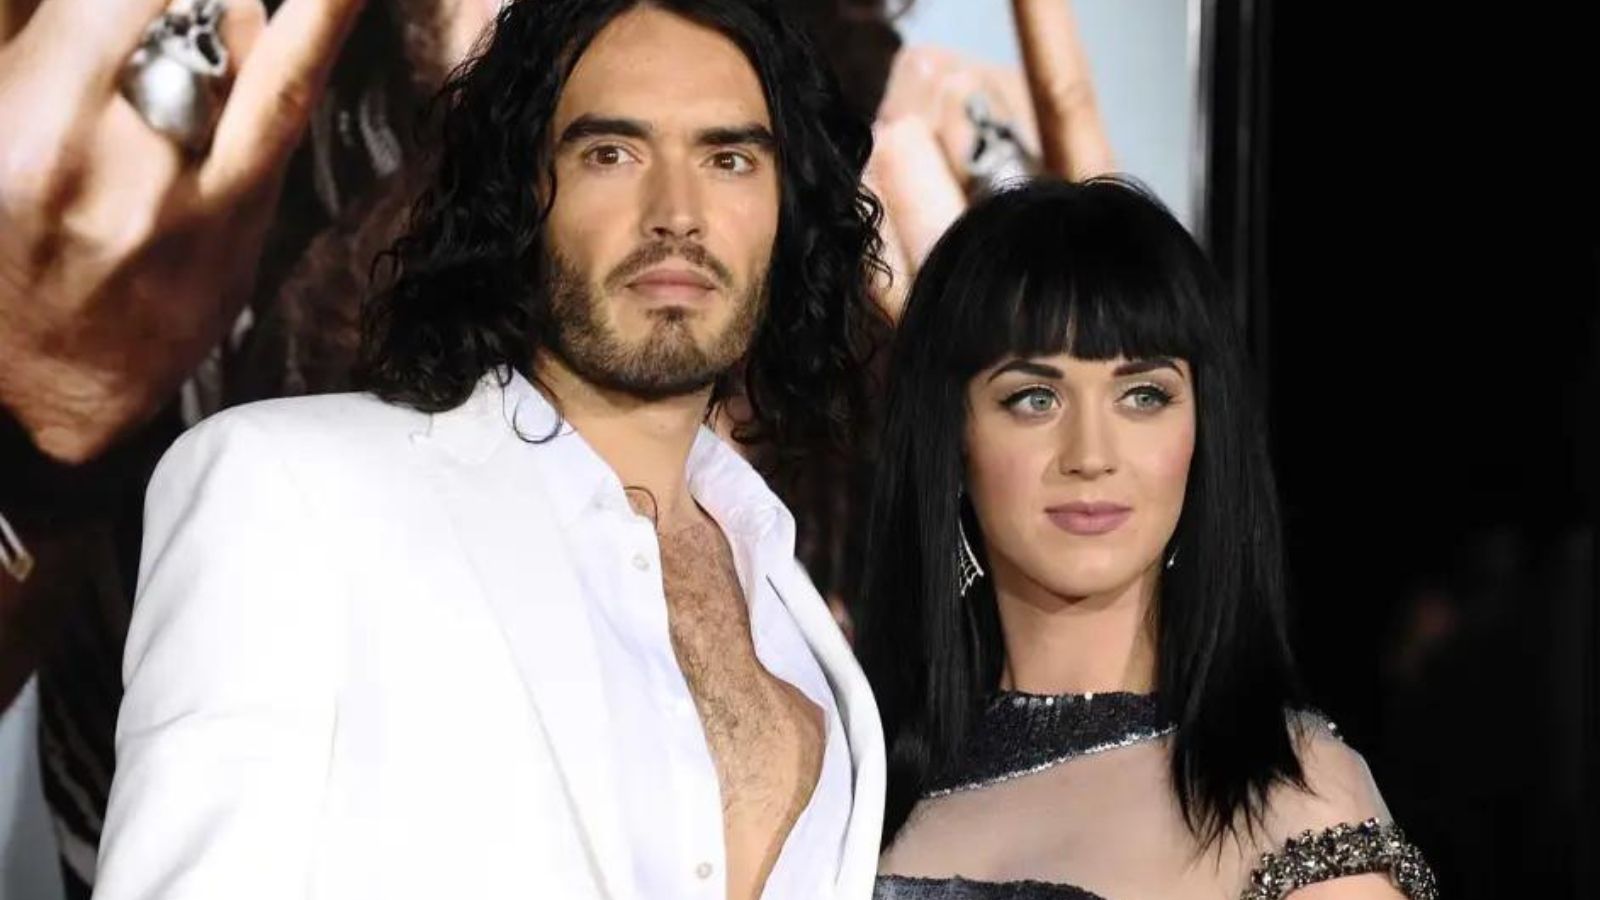 Russell Brand and the quick wedding with Katy Perry: 'It was a chaotic time and I felt disconnected'